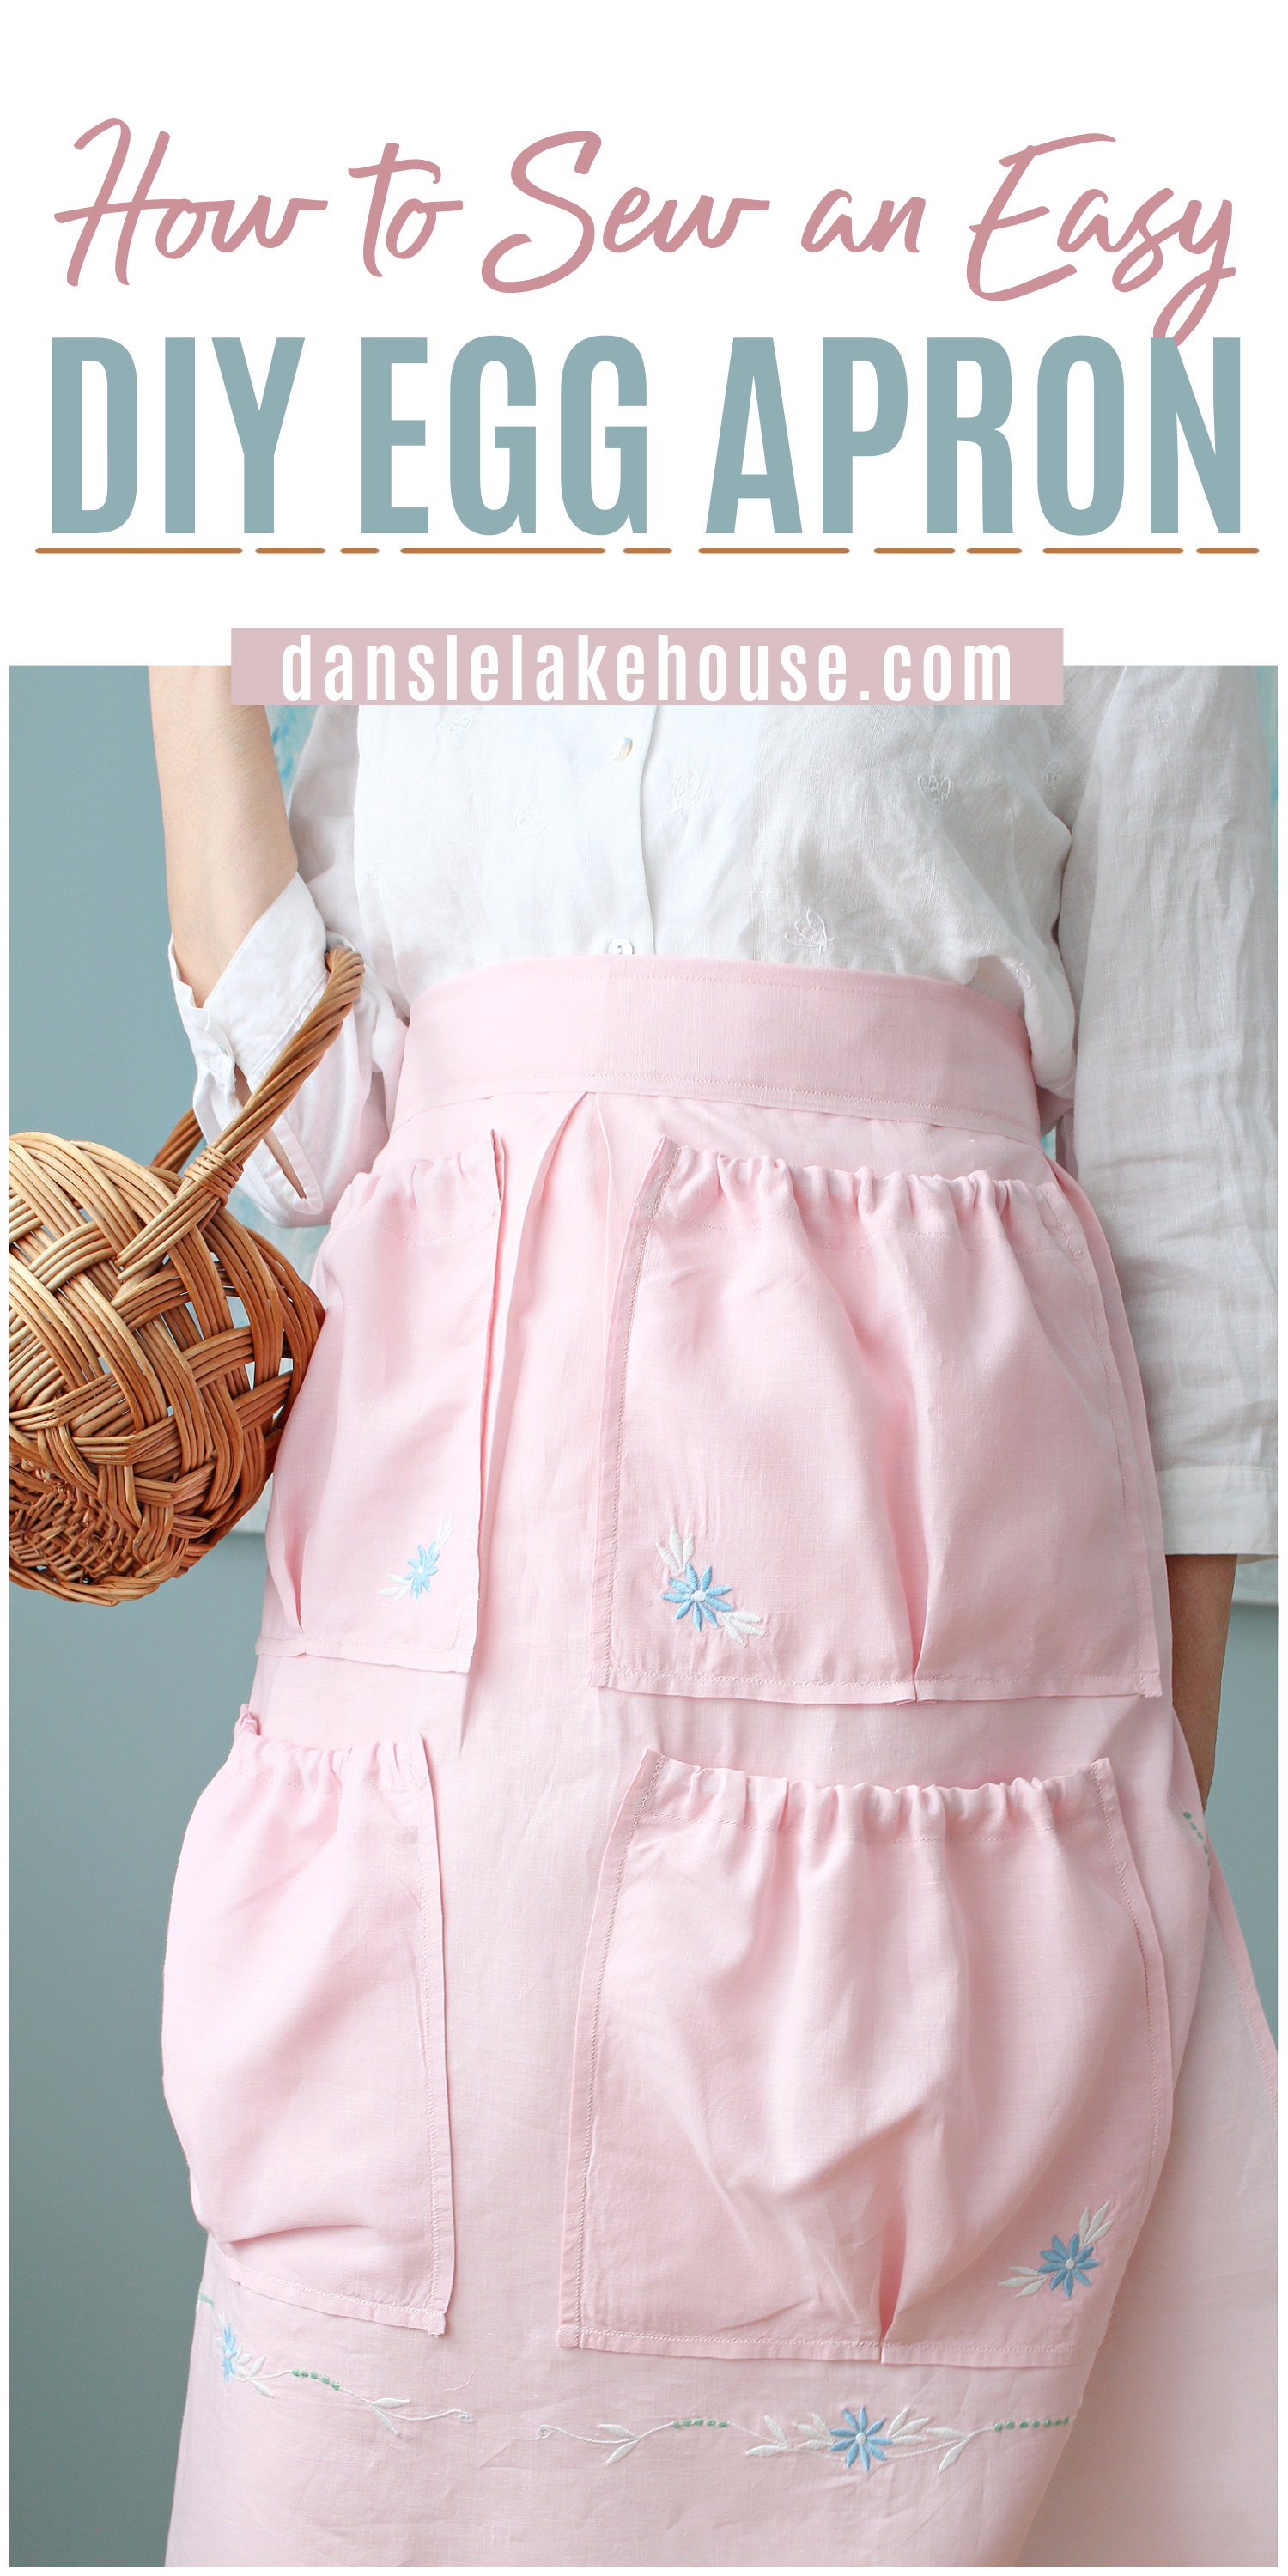 How to Sew an Easy DIY Egg Apron